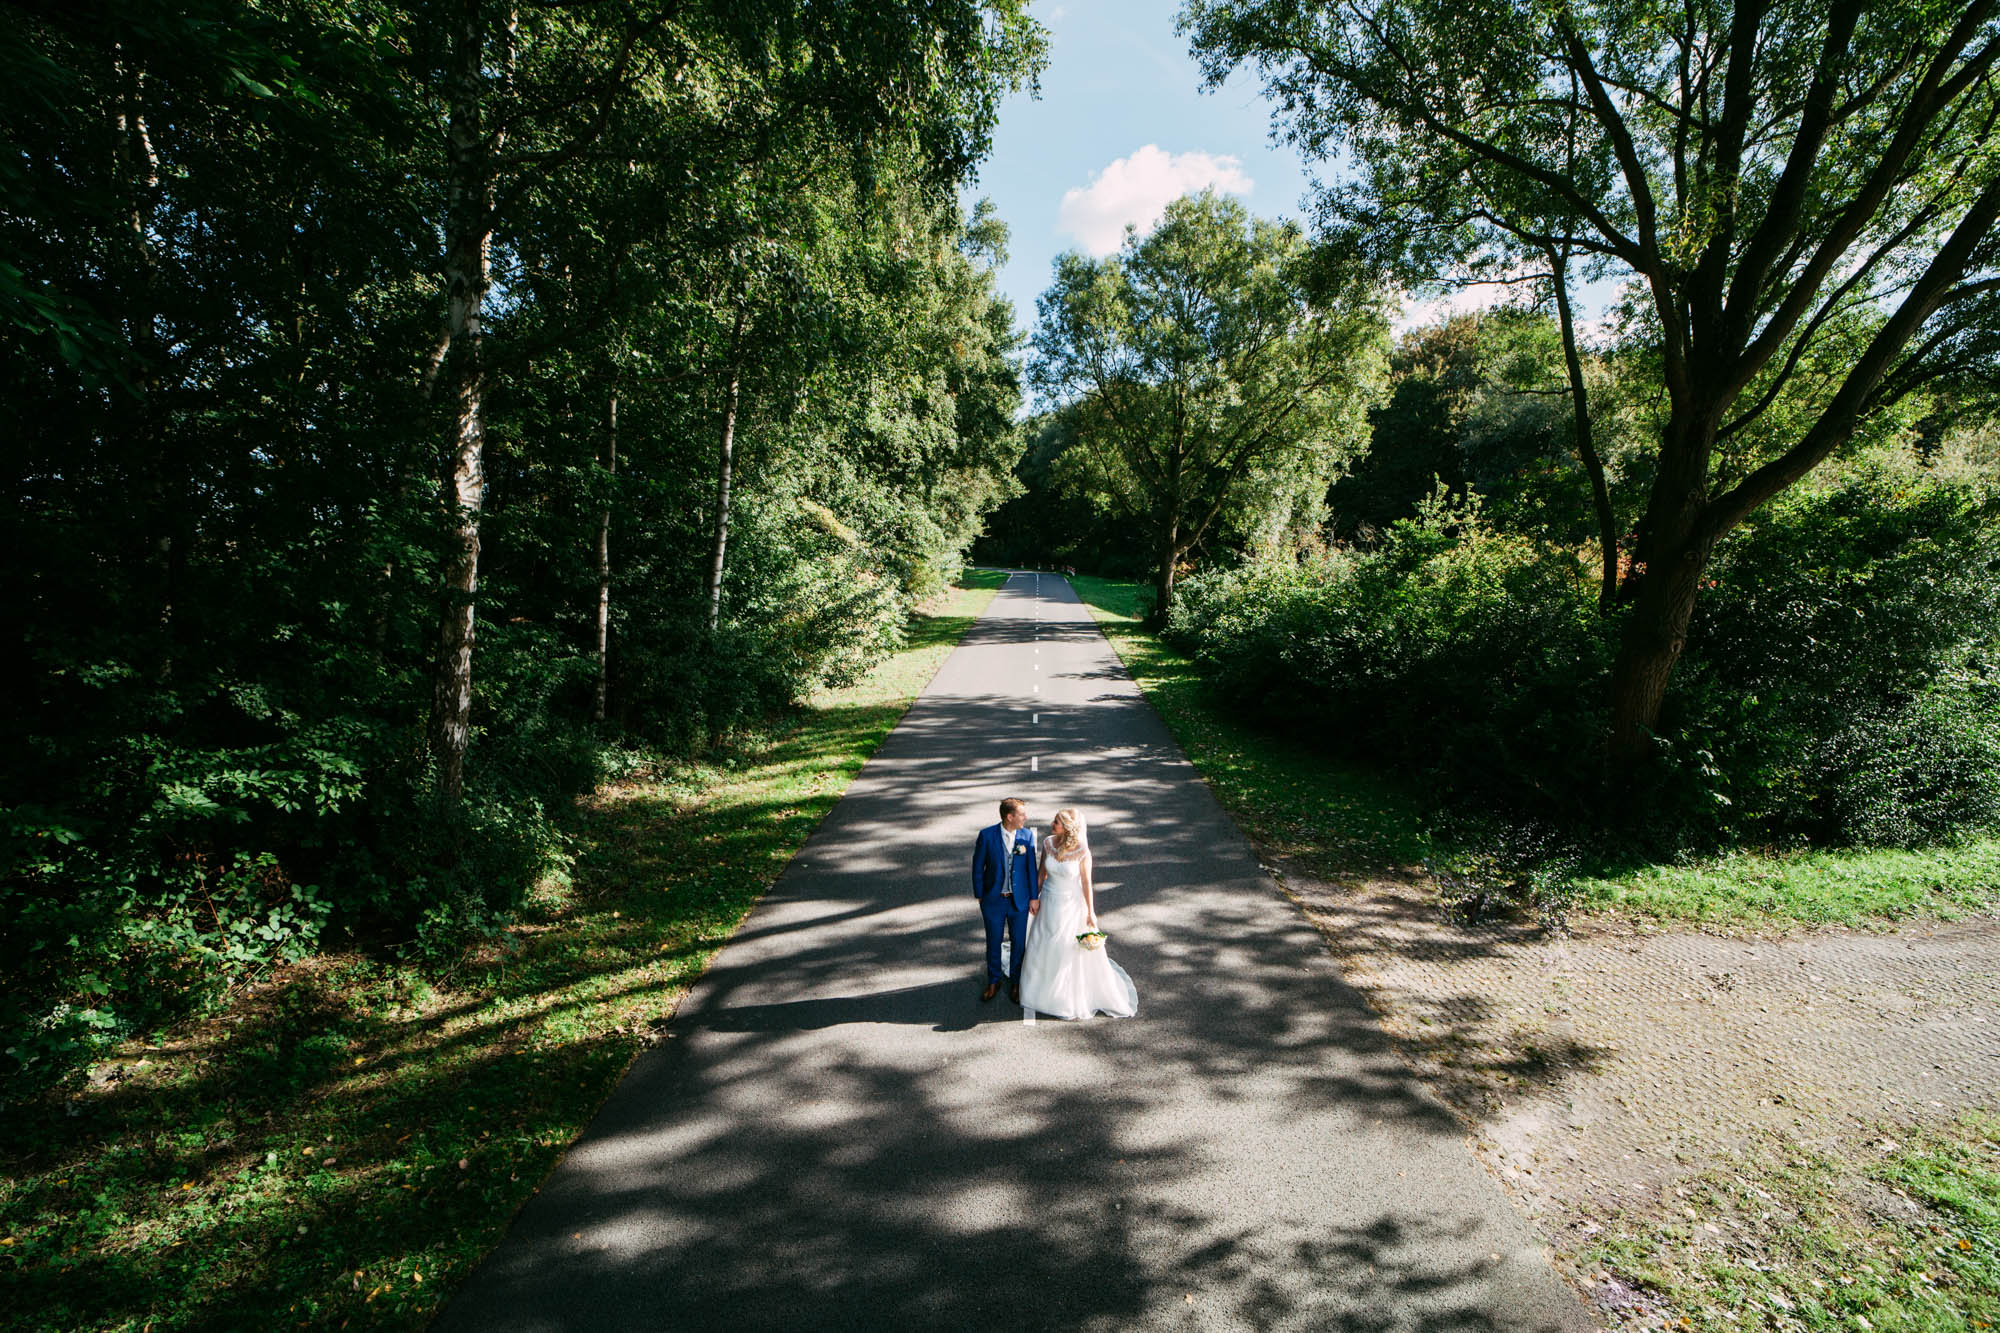 A bride in an A-line wedding dress and groom stand on a path in the forest.